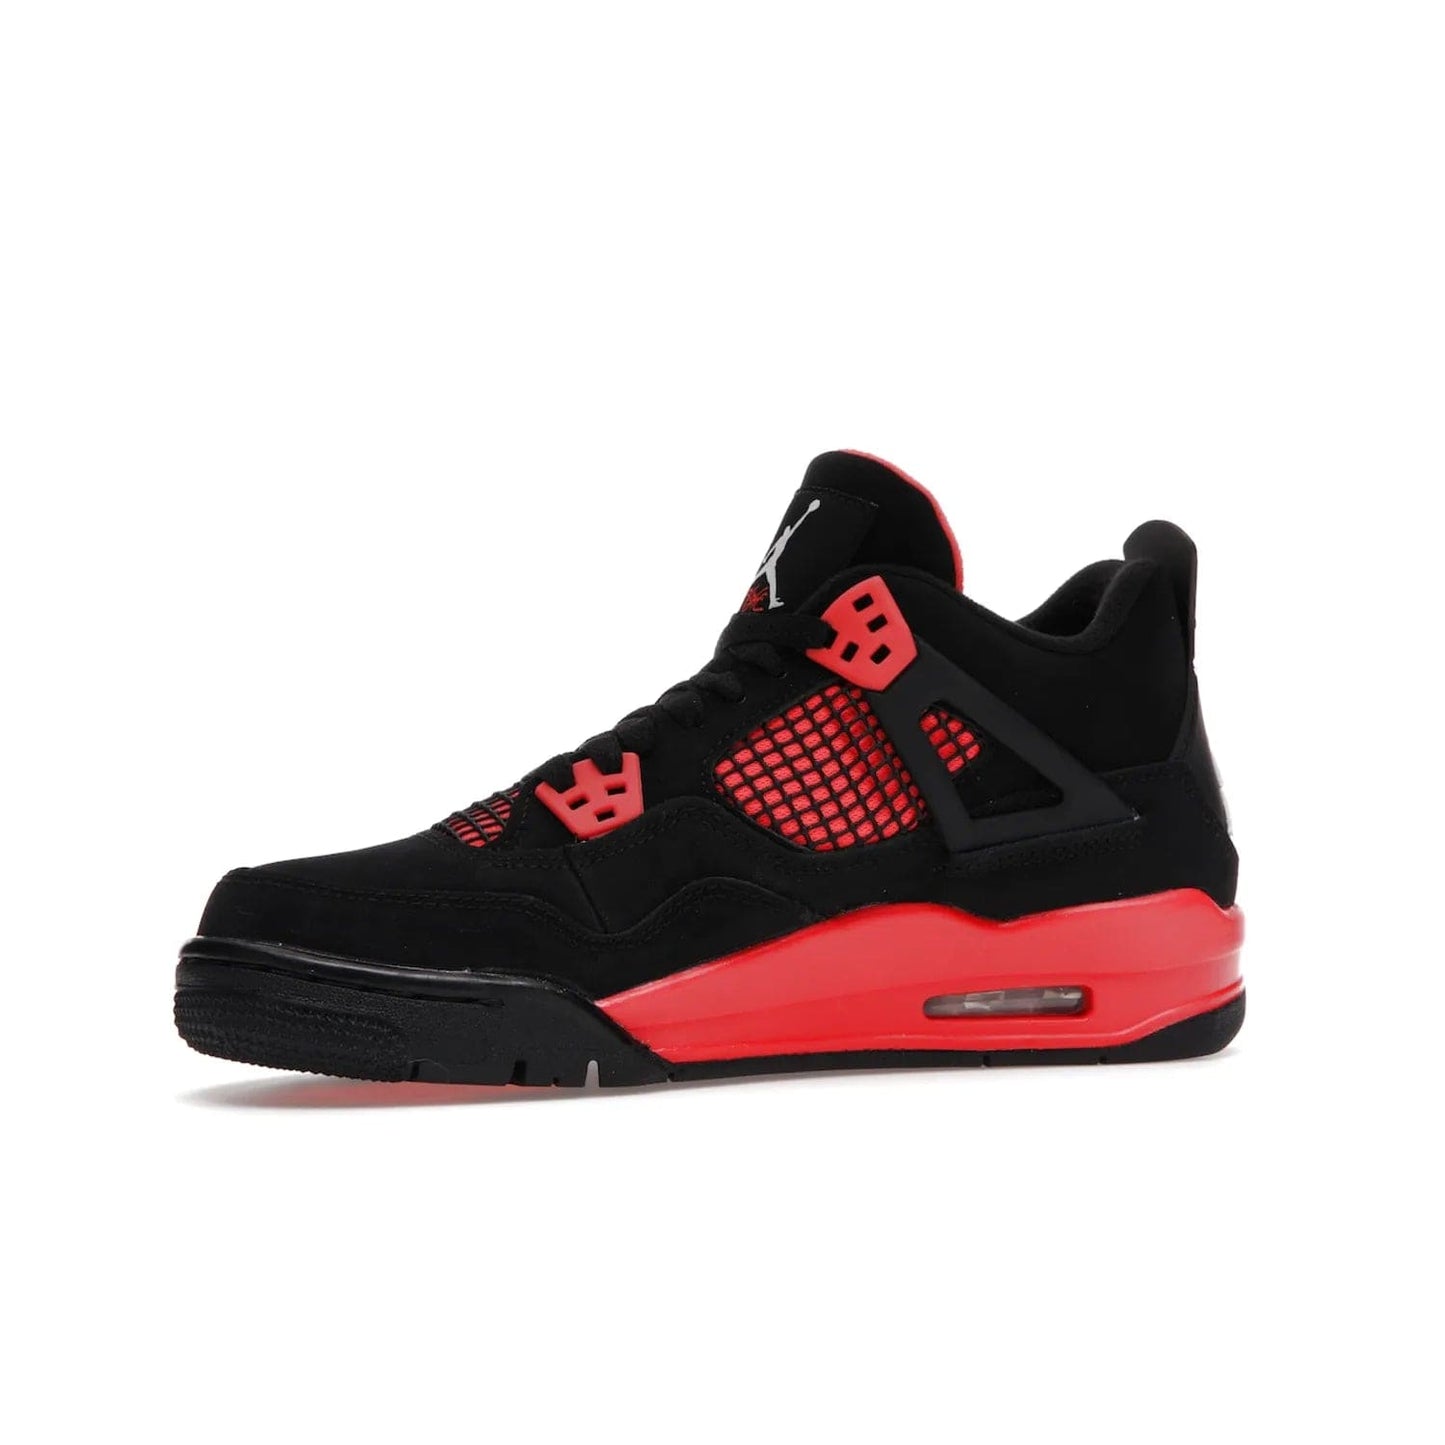 Jordan 4 Retro Red Thunder (GS) - Image 17 - Only at www.BallersClubKickz.com - The Air Jordan 4 Retro Red Thunder GS features a stylish black and crimson upper with a Jumpman logo. Athletic midsole with Air bubbles for cushioning and black rubber outsole with iconic motif complete this classic sneaker.